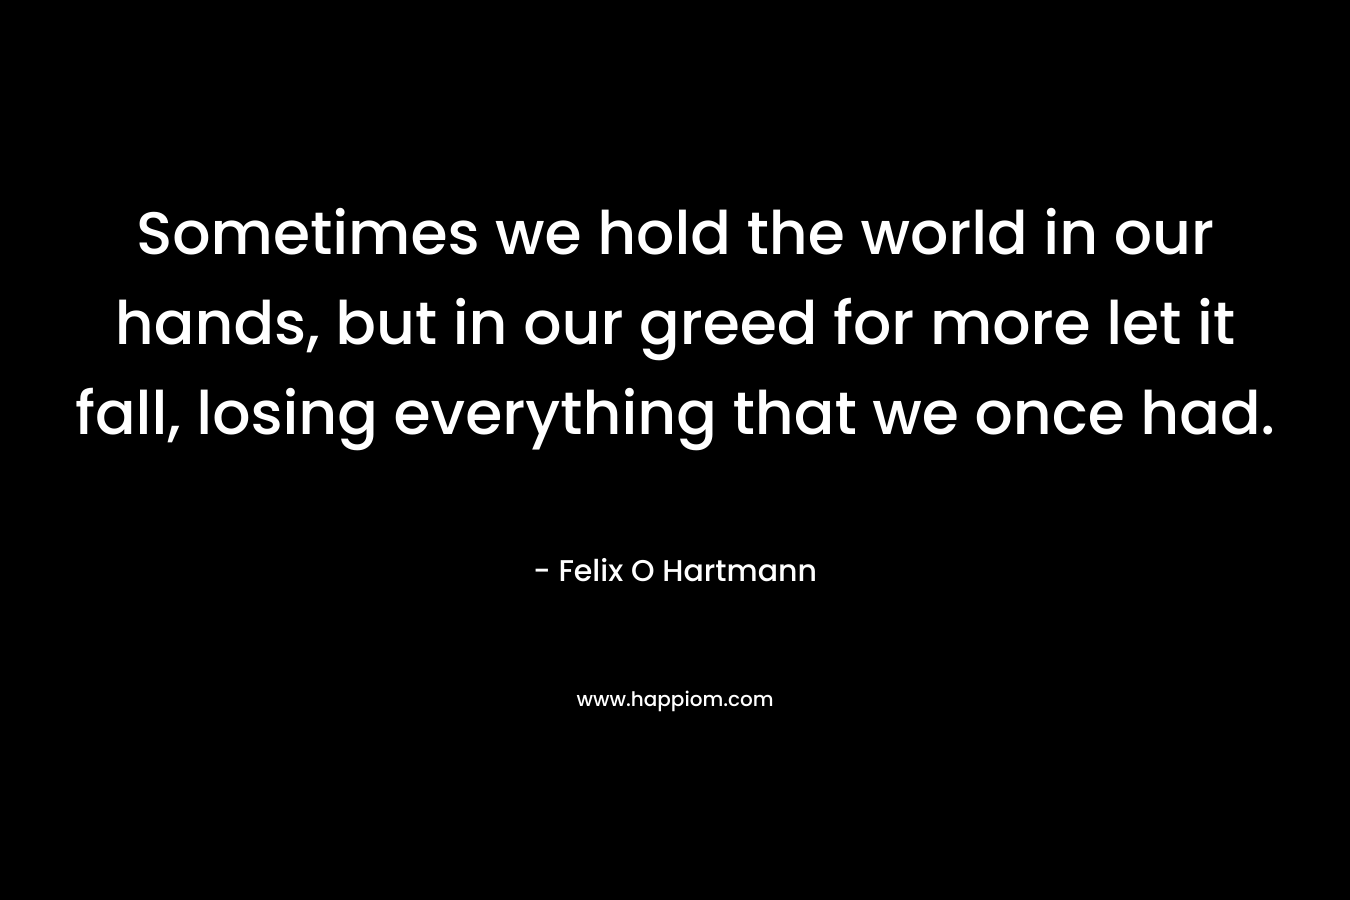 Sometimes we hold the world in our hands, but in our greed for more let it fall, losing everything that we once had.